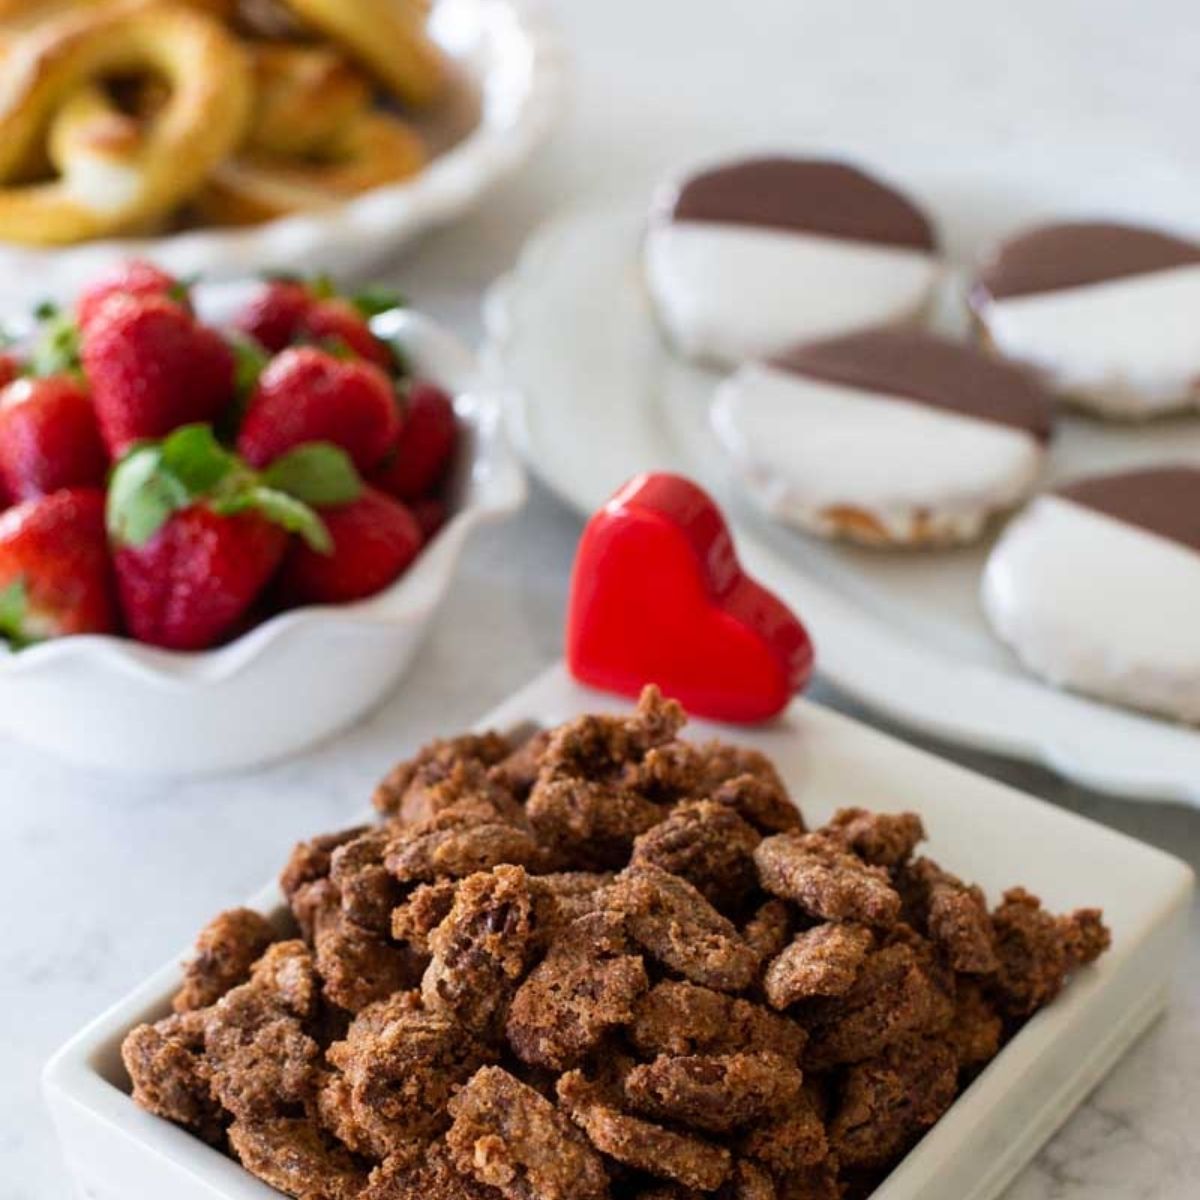 A variety of New York themed party foods are on the kitchen counter including a container of sugared nuts, black and white cookies, fresh strawberries.